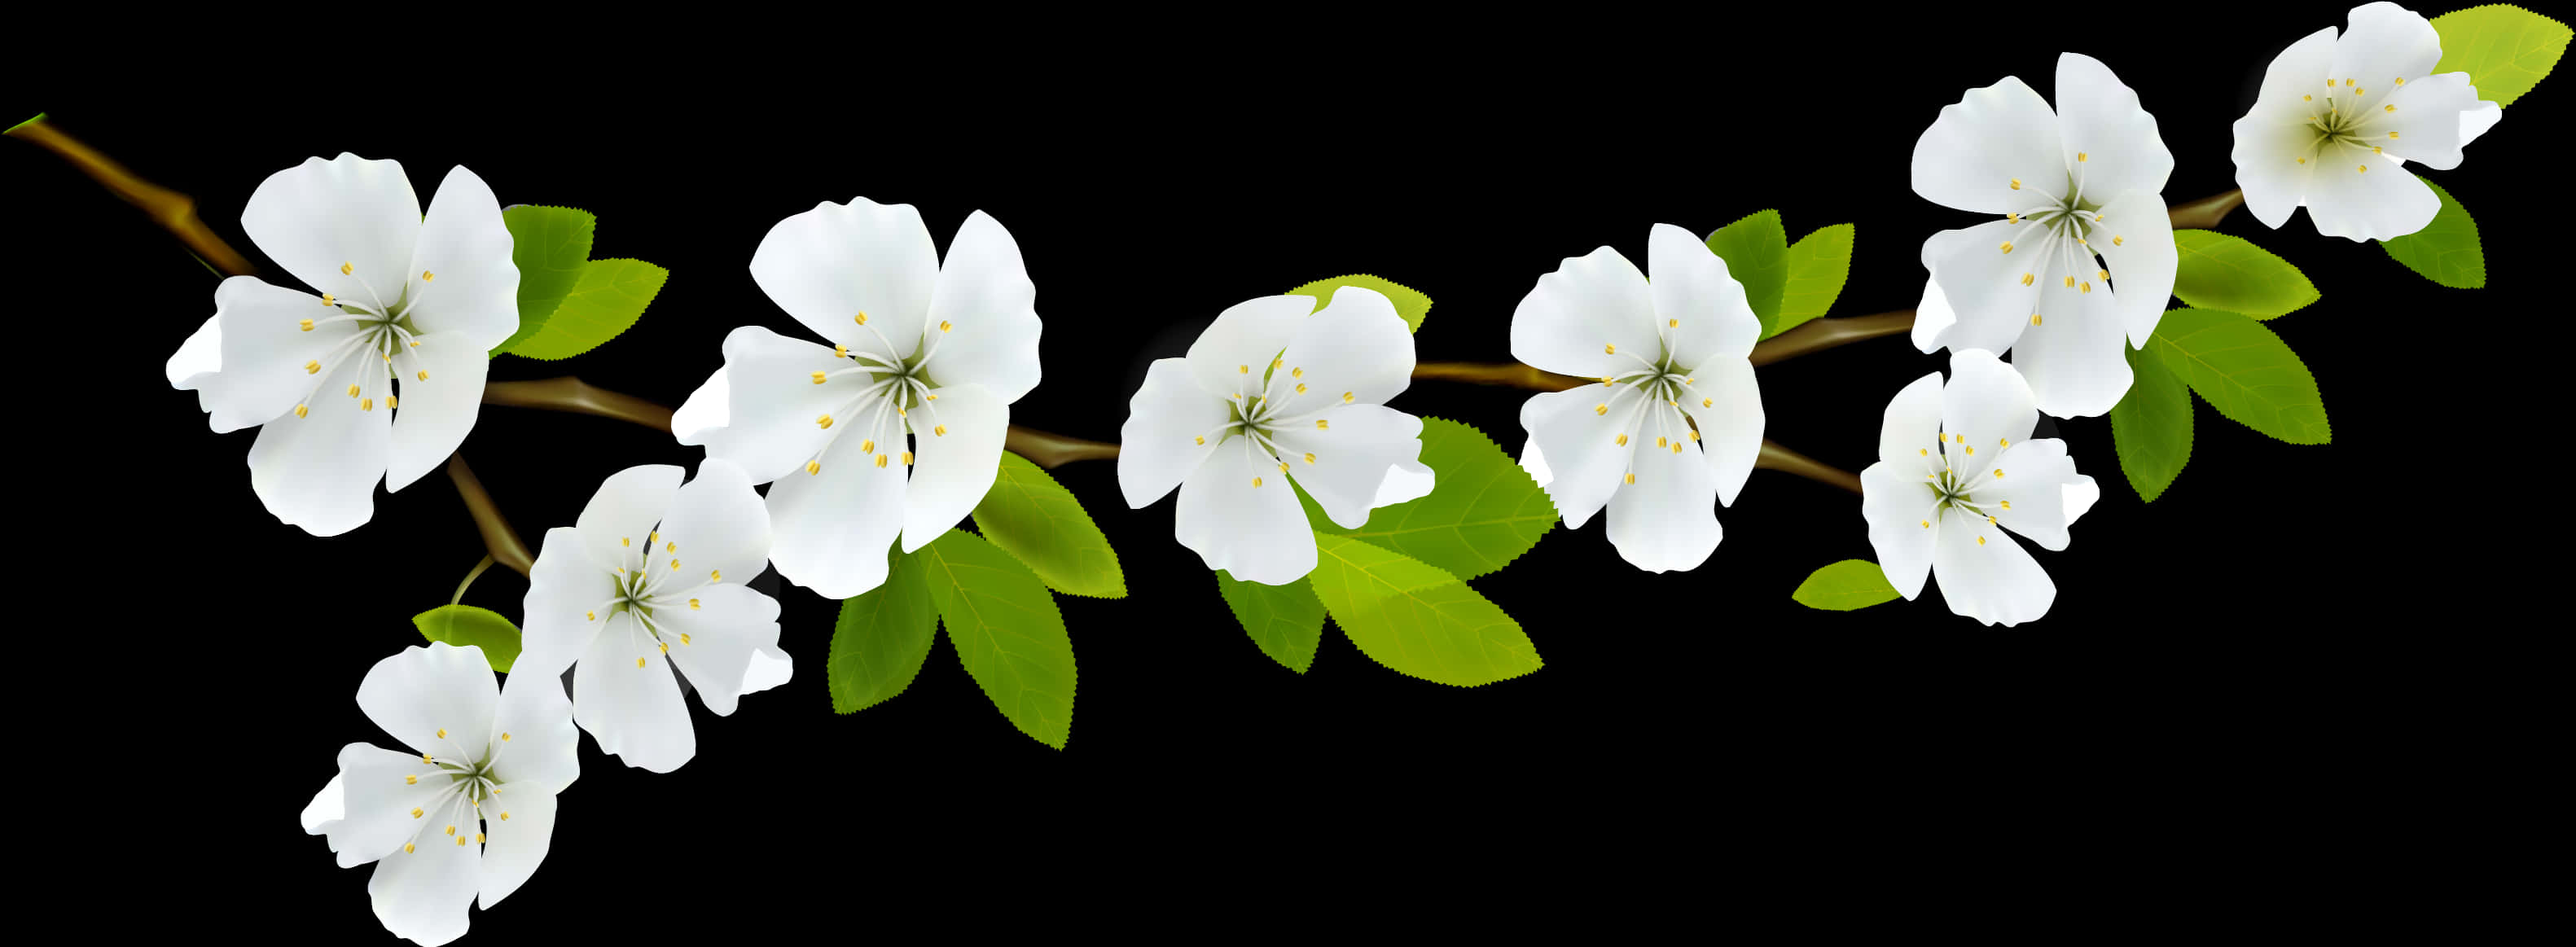 A White Flowers On A Branch